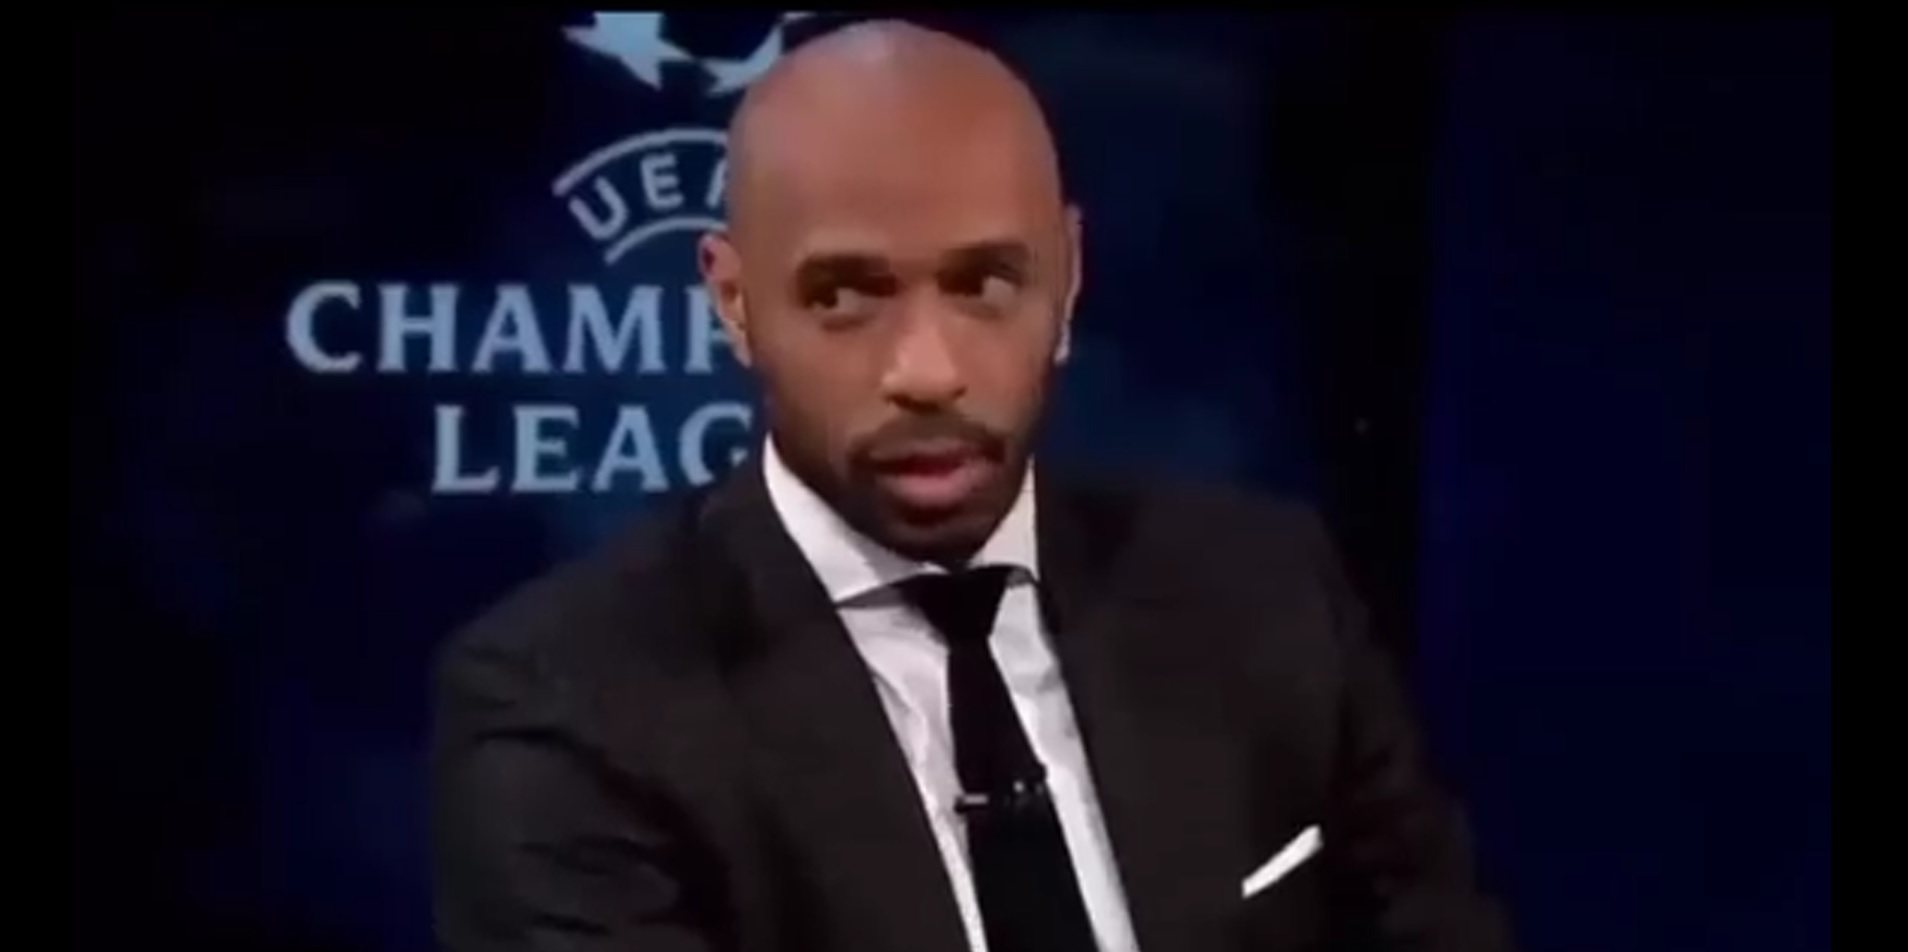 (Video) Thierry Henry foreshadowed horrifying events in Paris with scathing review of French suburb housing Stade de France